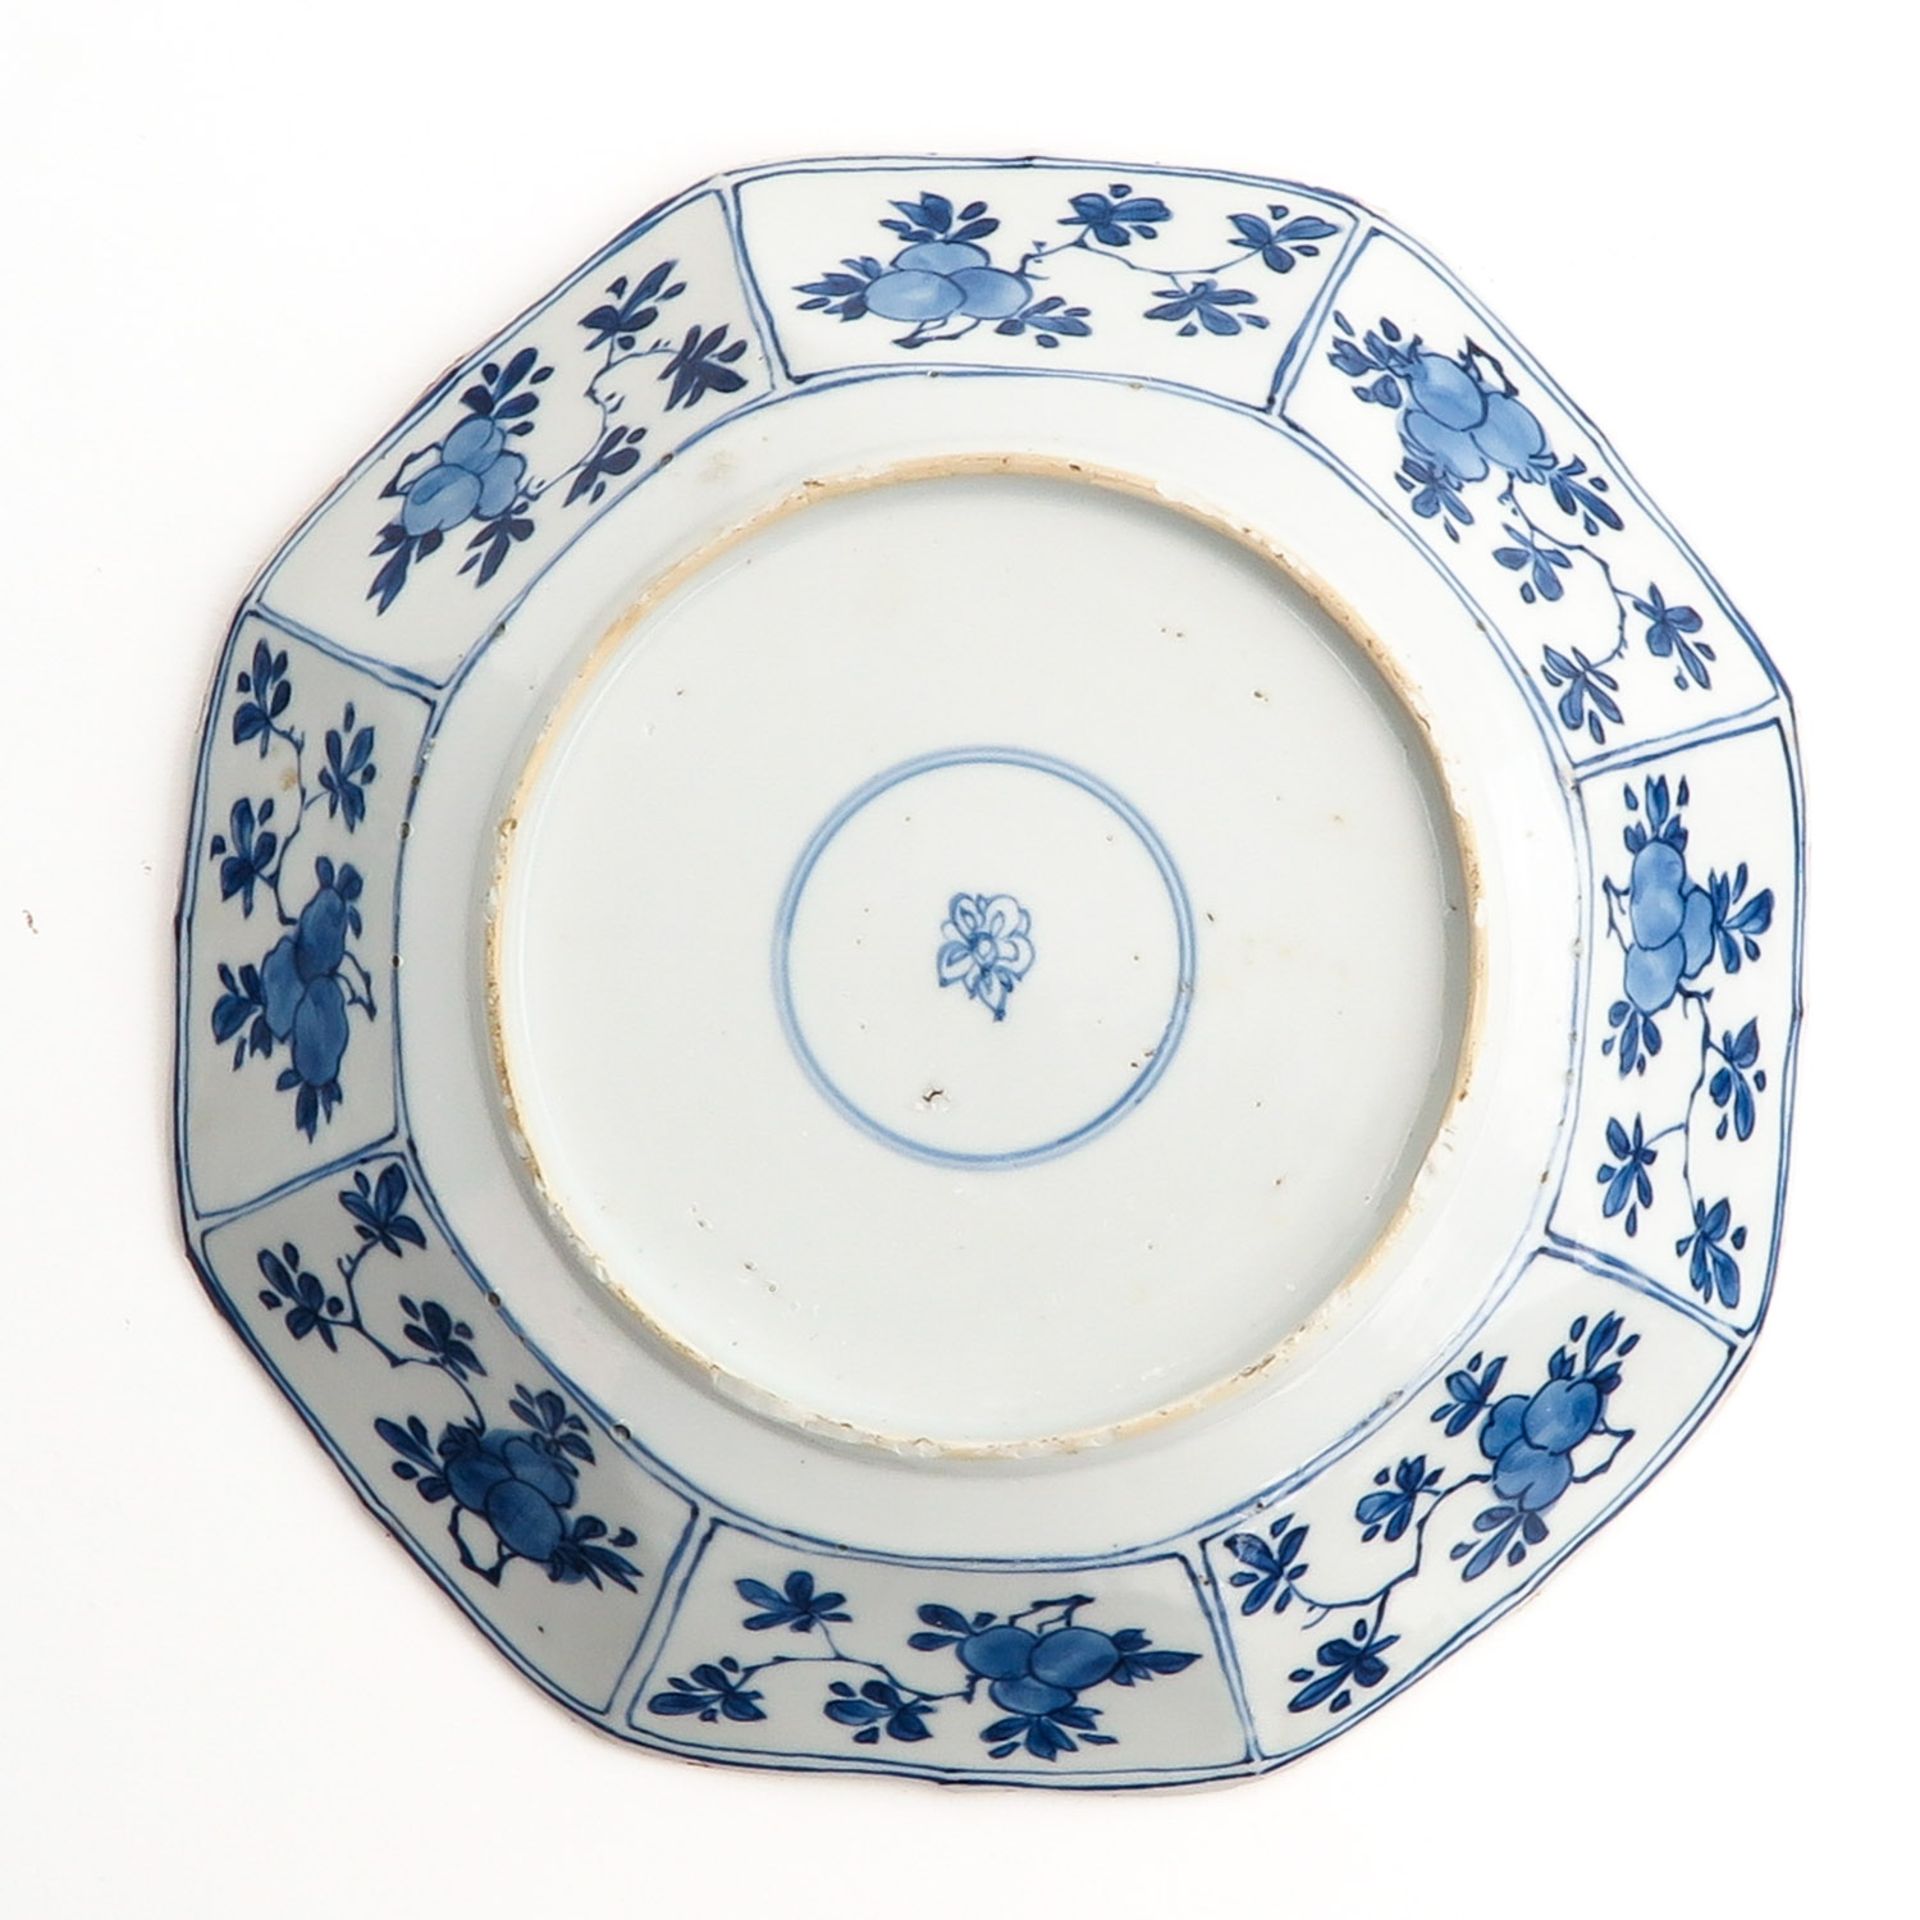 Two Blue and White Plates - Image 4 of 10